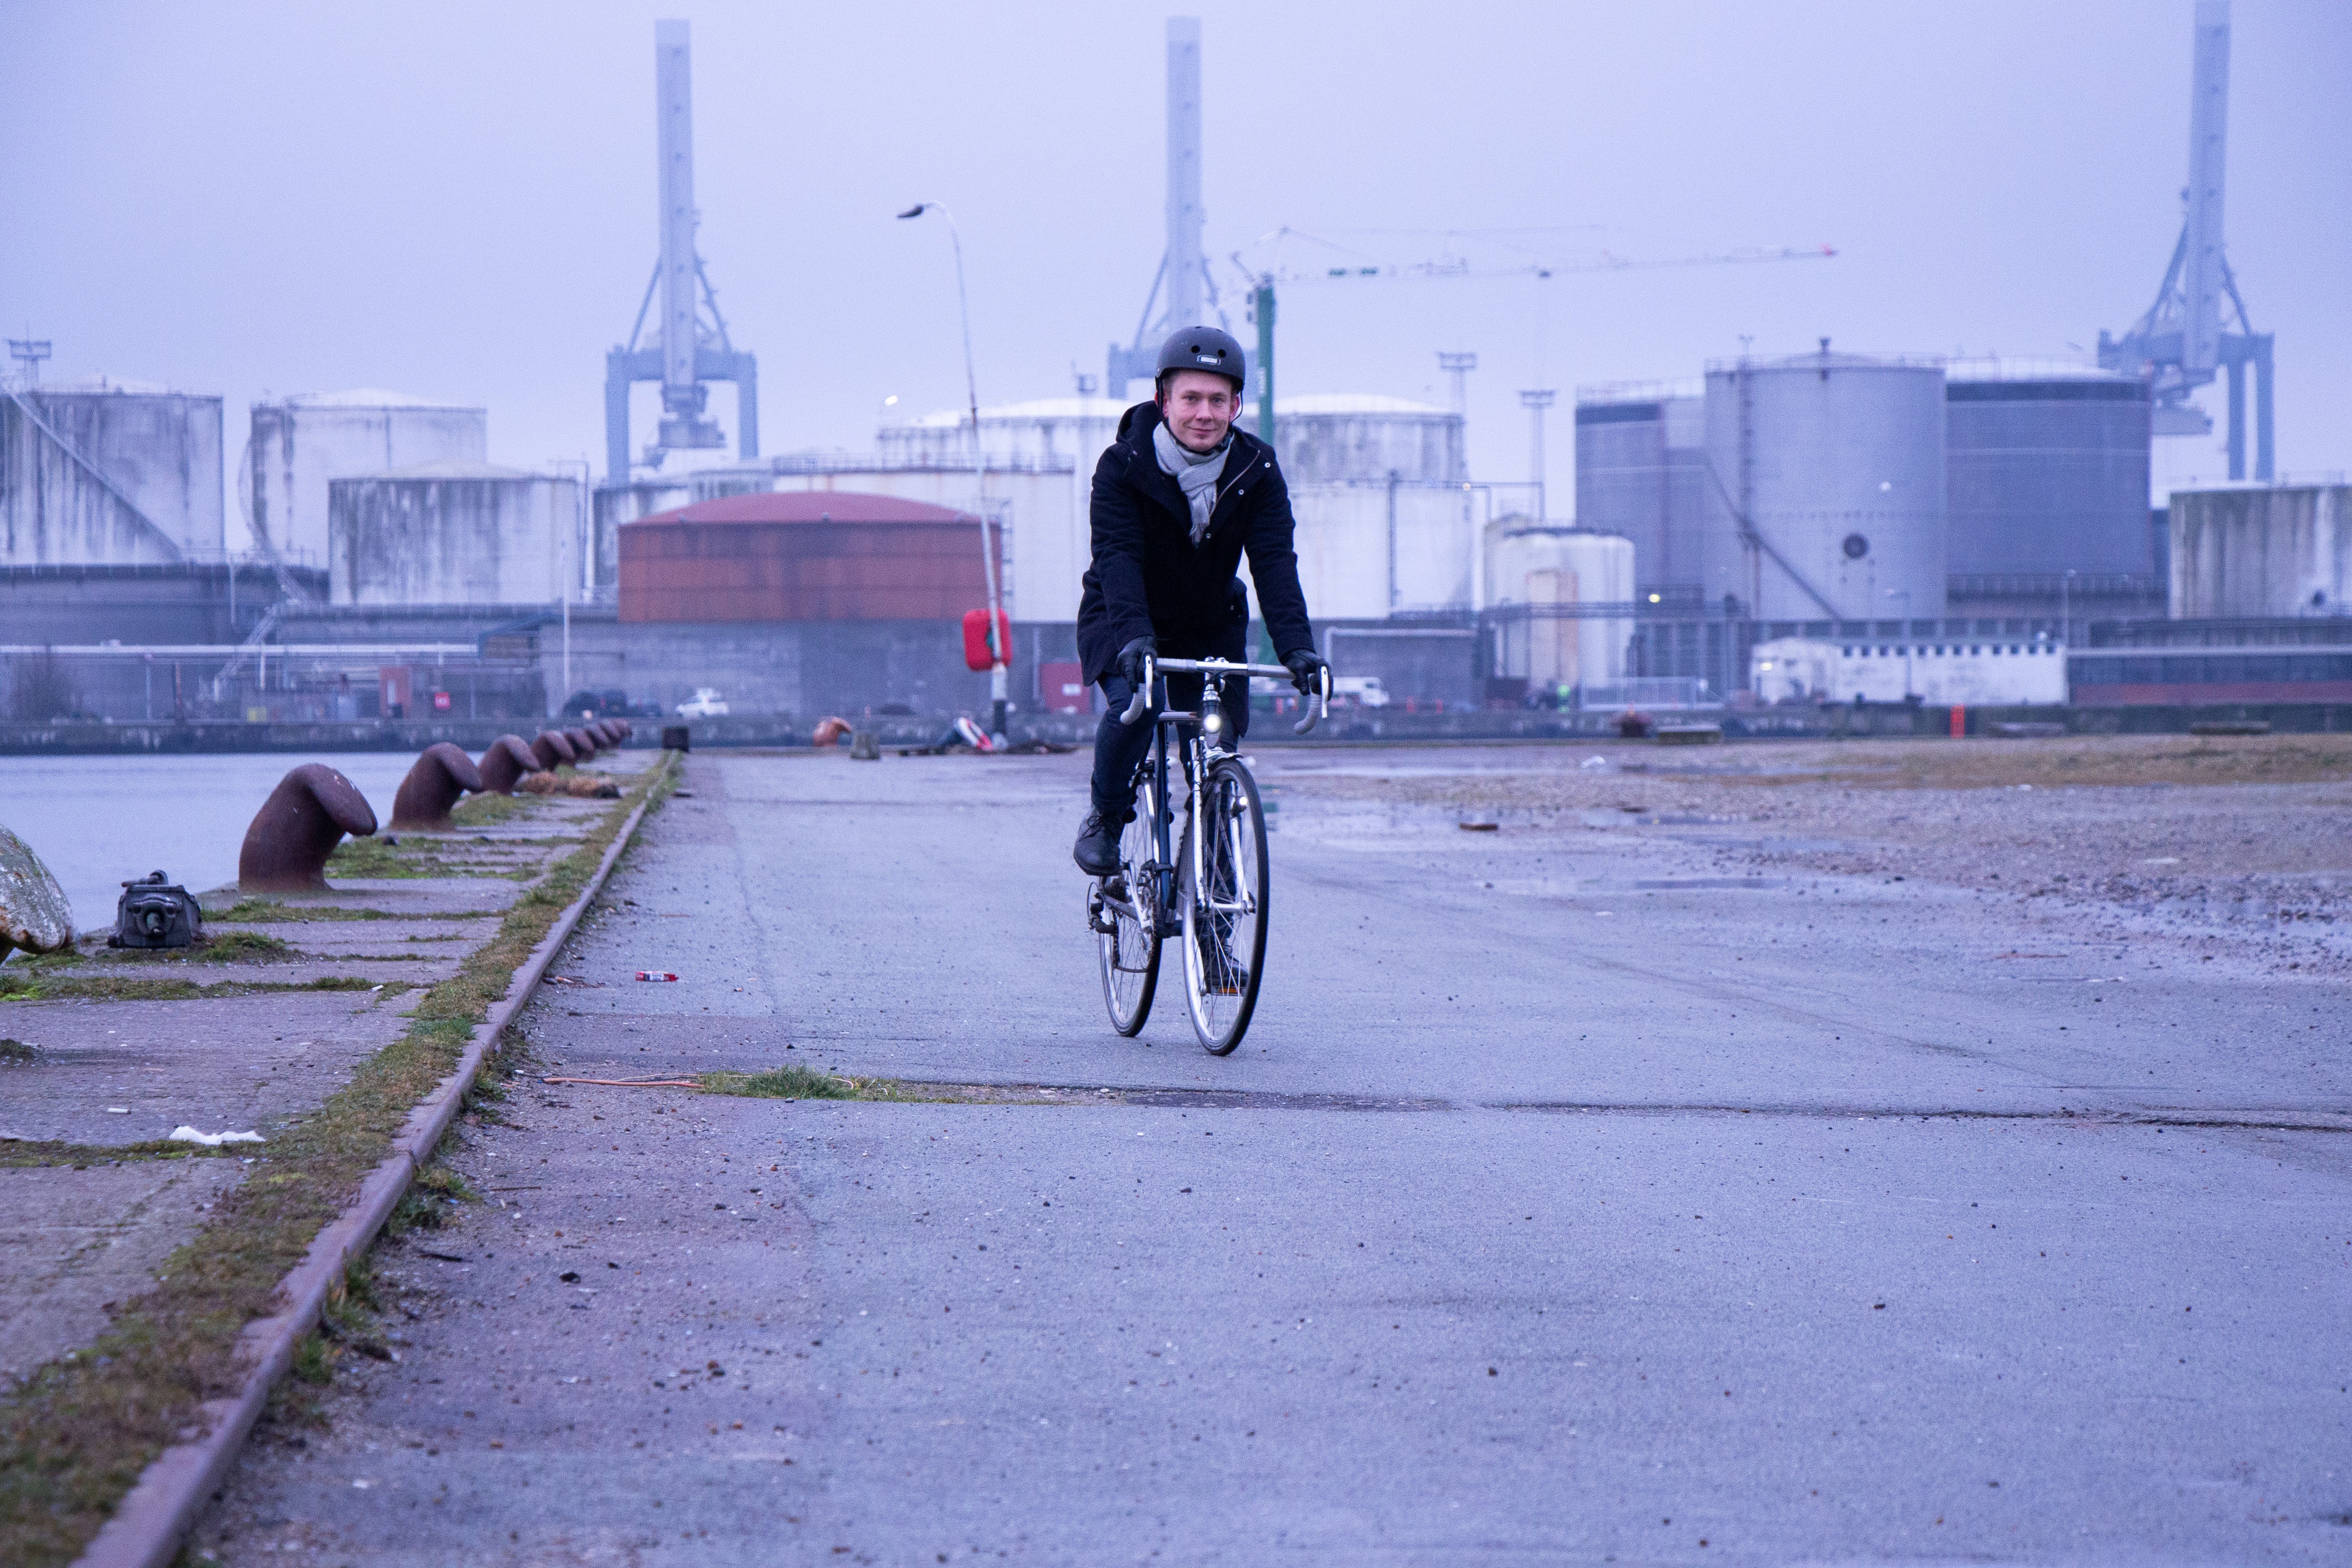 Winter Biking in the City: Exploring Urban Landscapes Safely